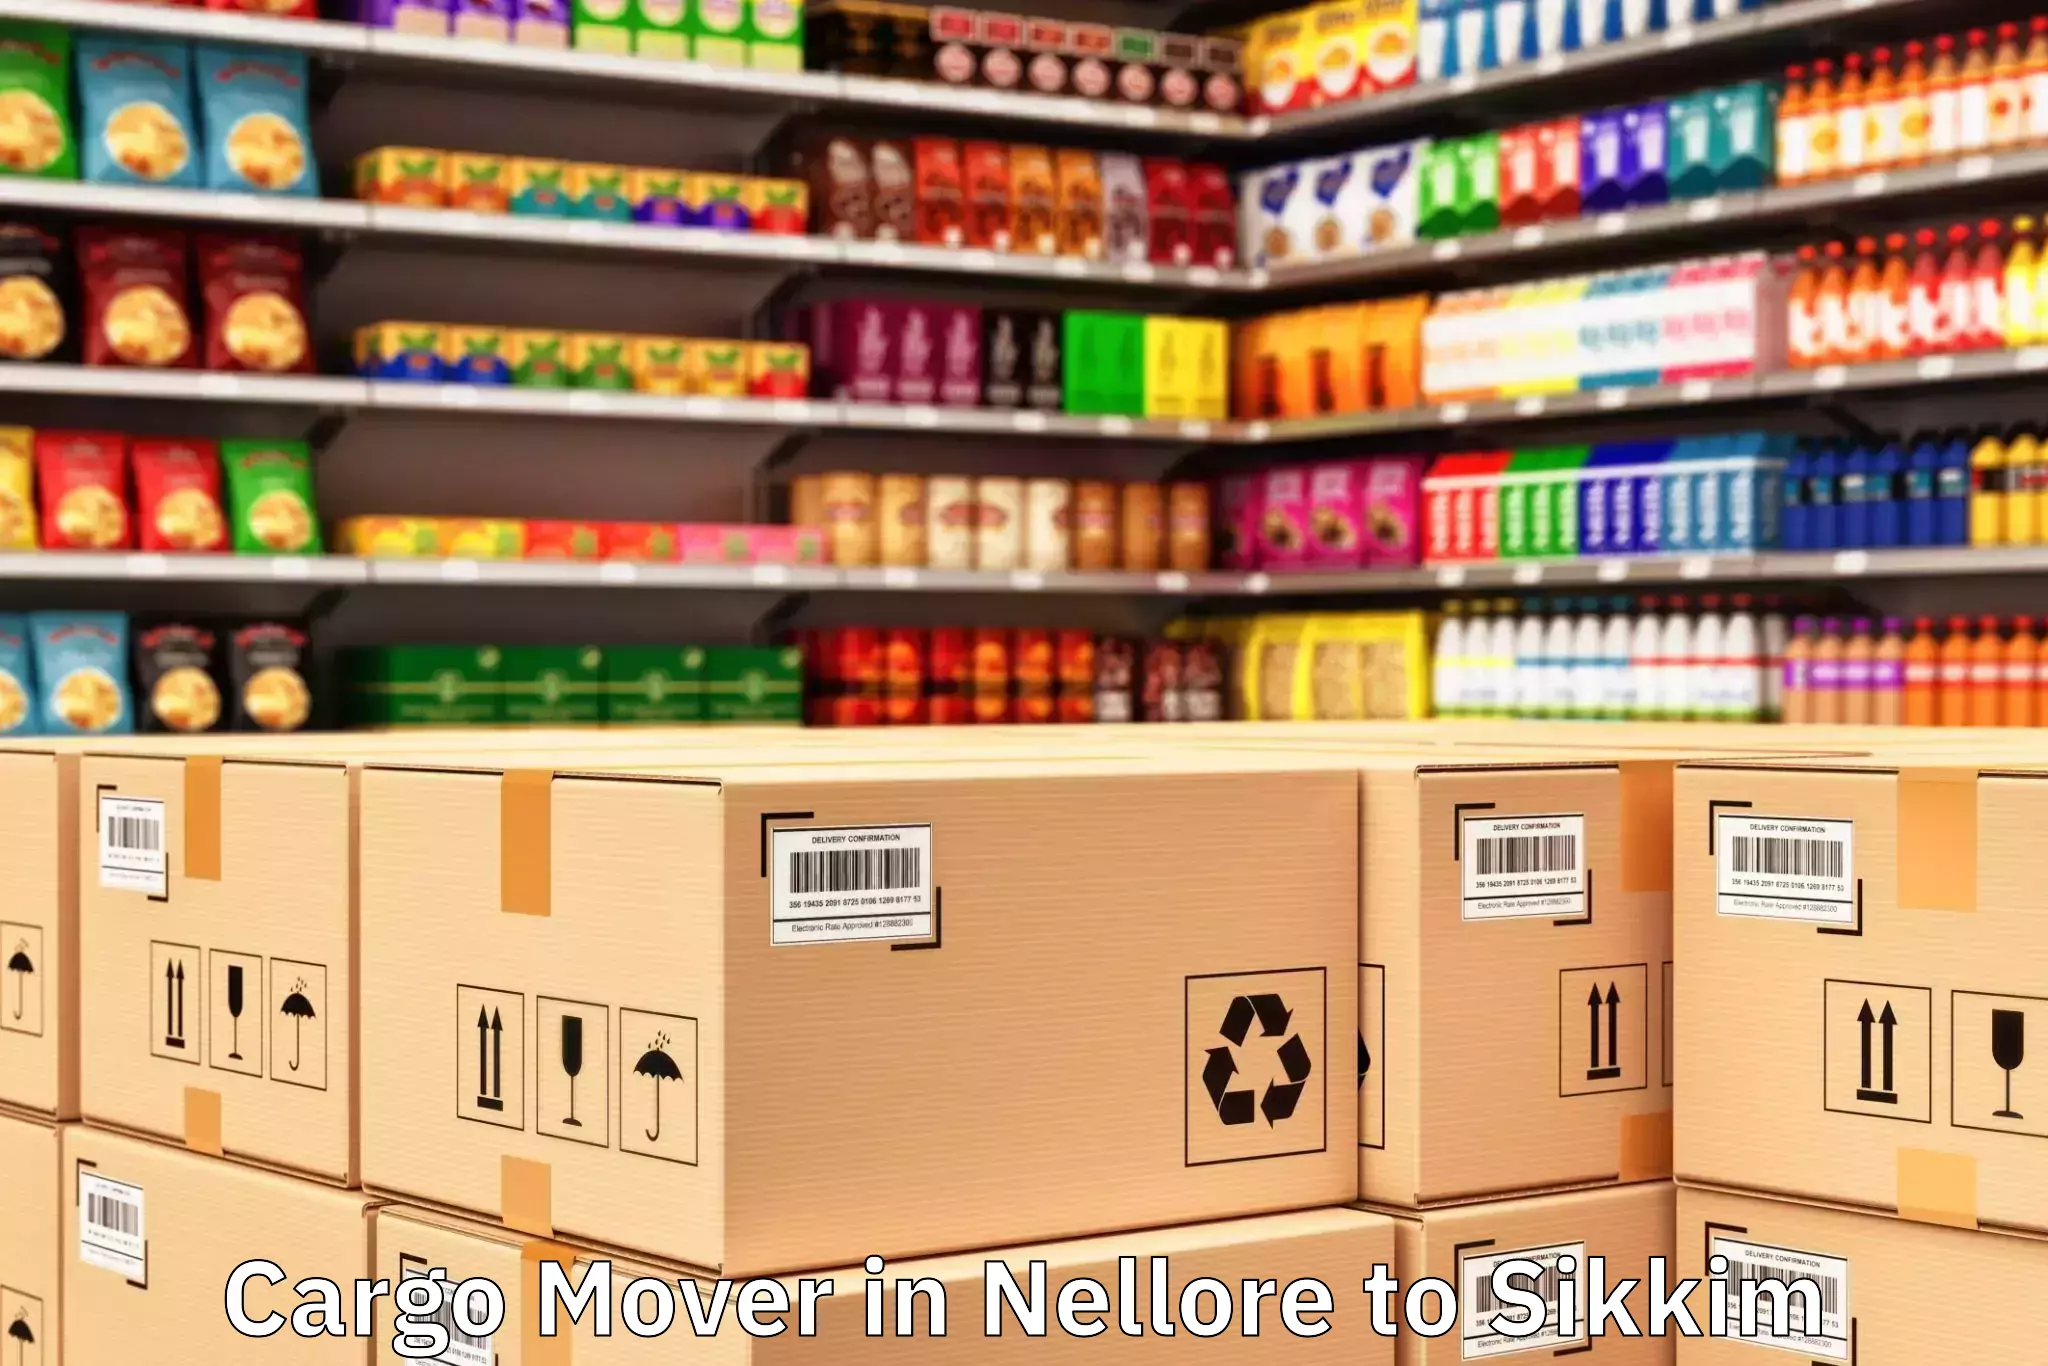 Nellore to Pelling Cargo Mover Booking